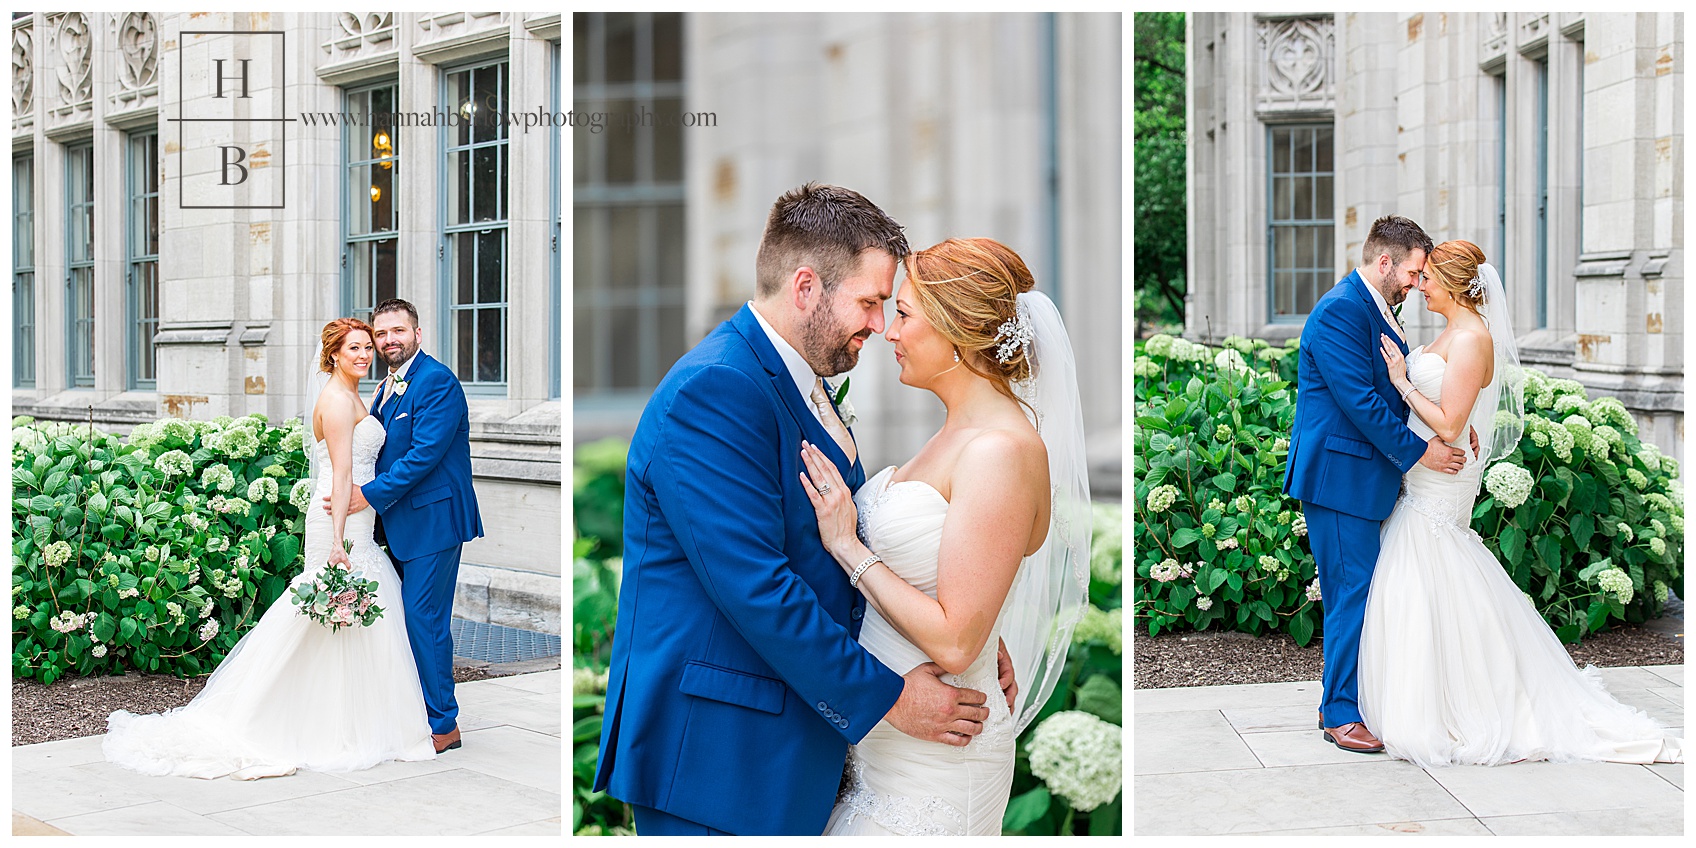 Cathedral of Learning Bride and Groom Formal Photos